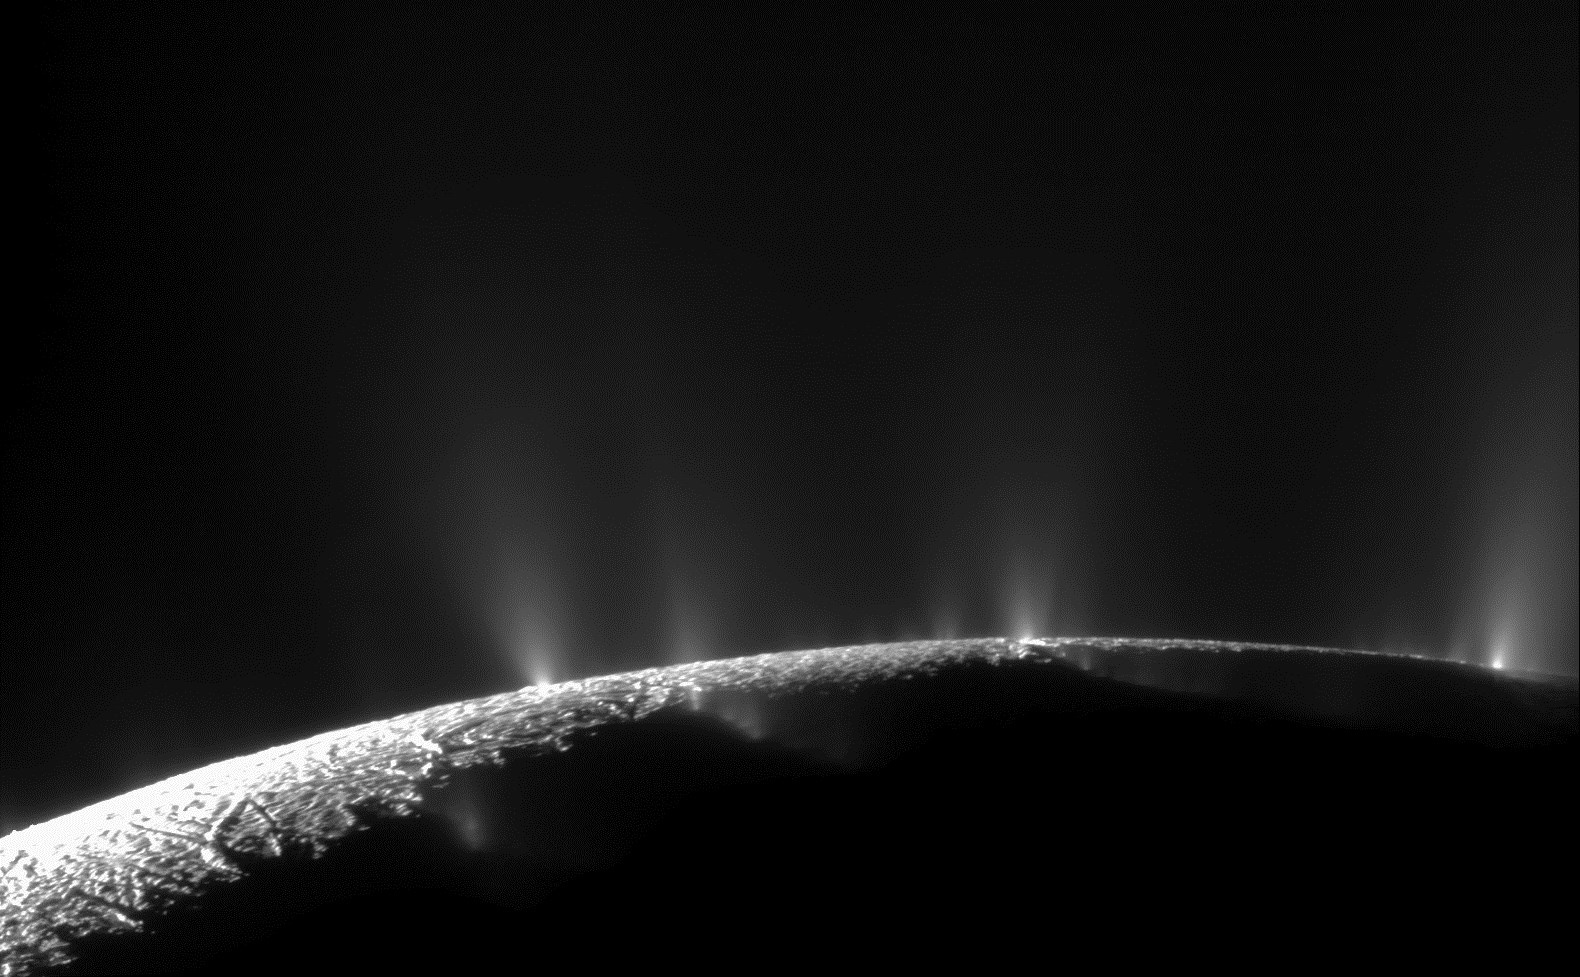 Dramatic plumes, both large and small, spray water ice and vapor from many locations along the famed "tiger stripes" near the south pole of Saturn's moon Enceladus. (NASA/JPL-Caltech/SSI)